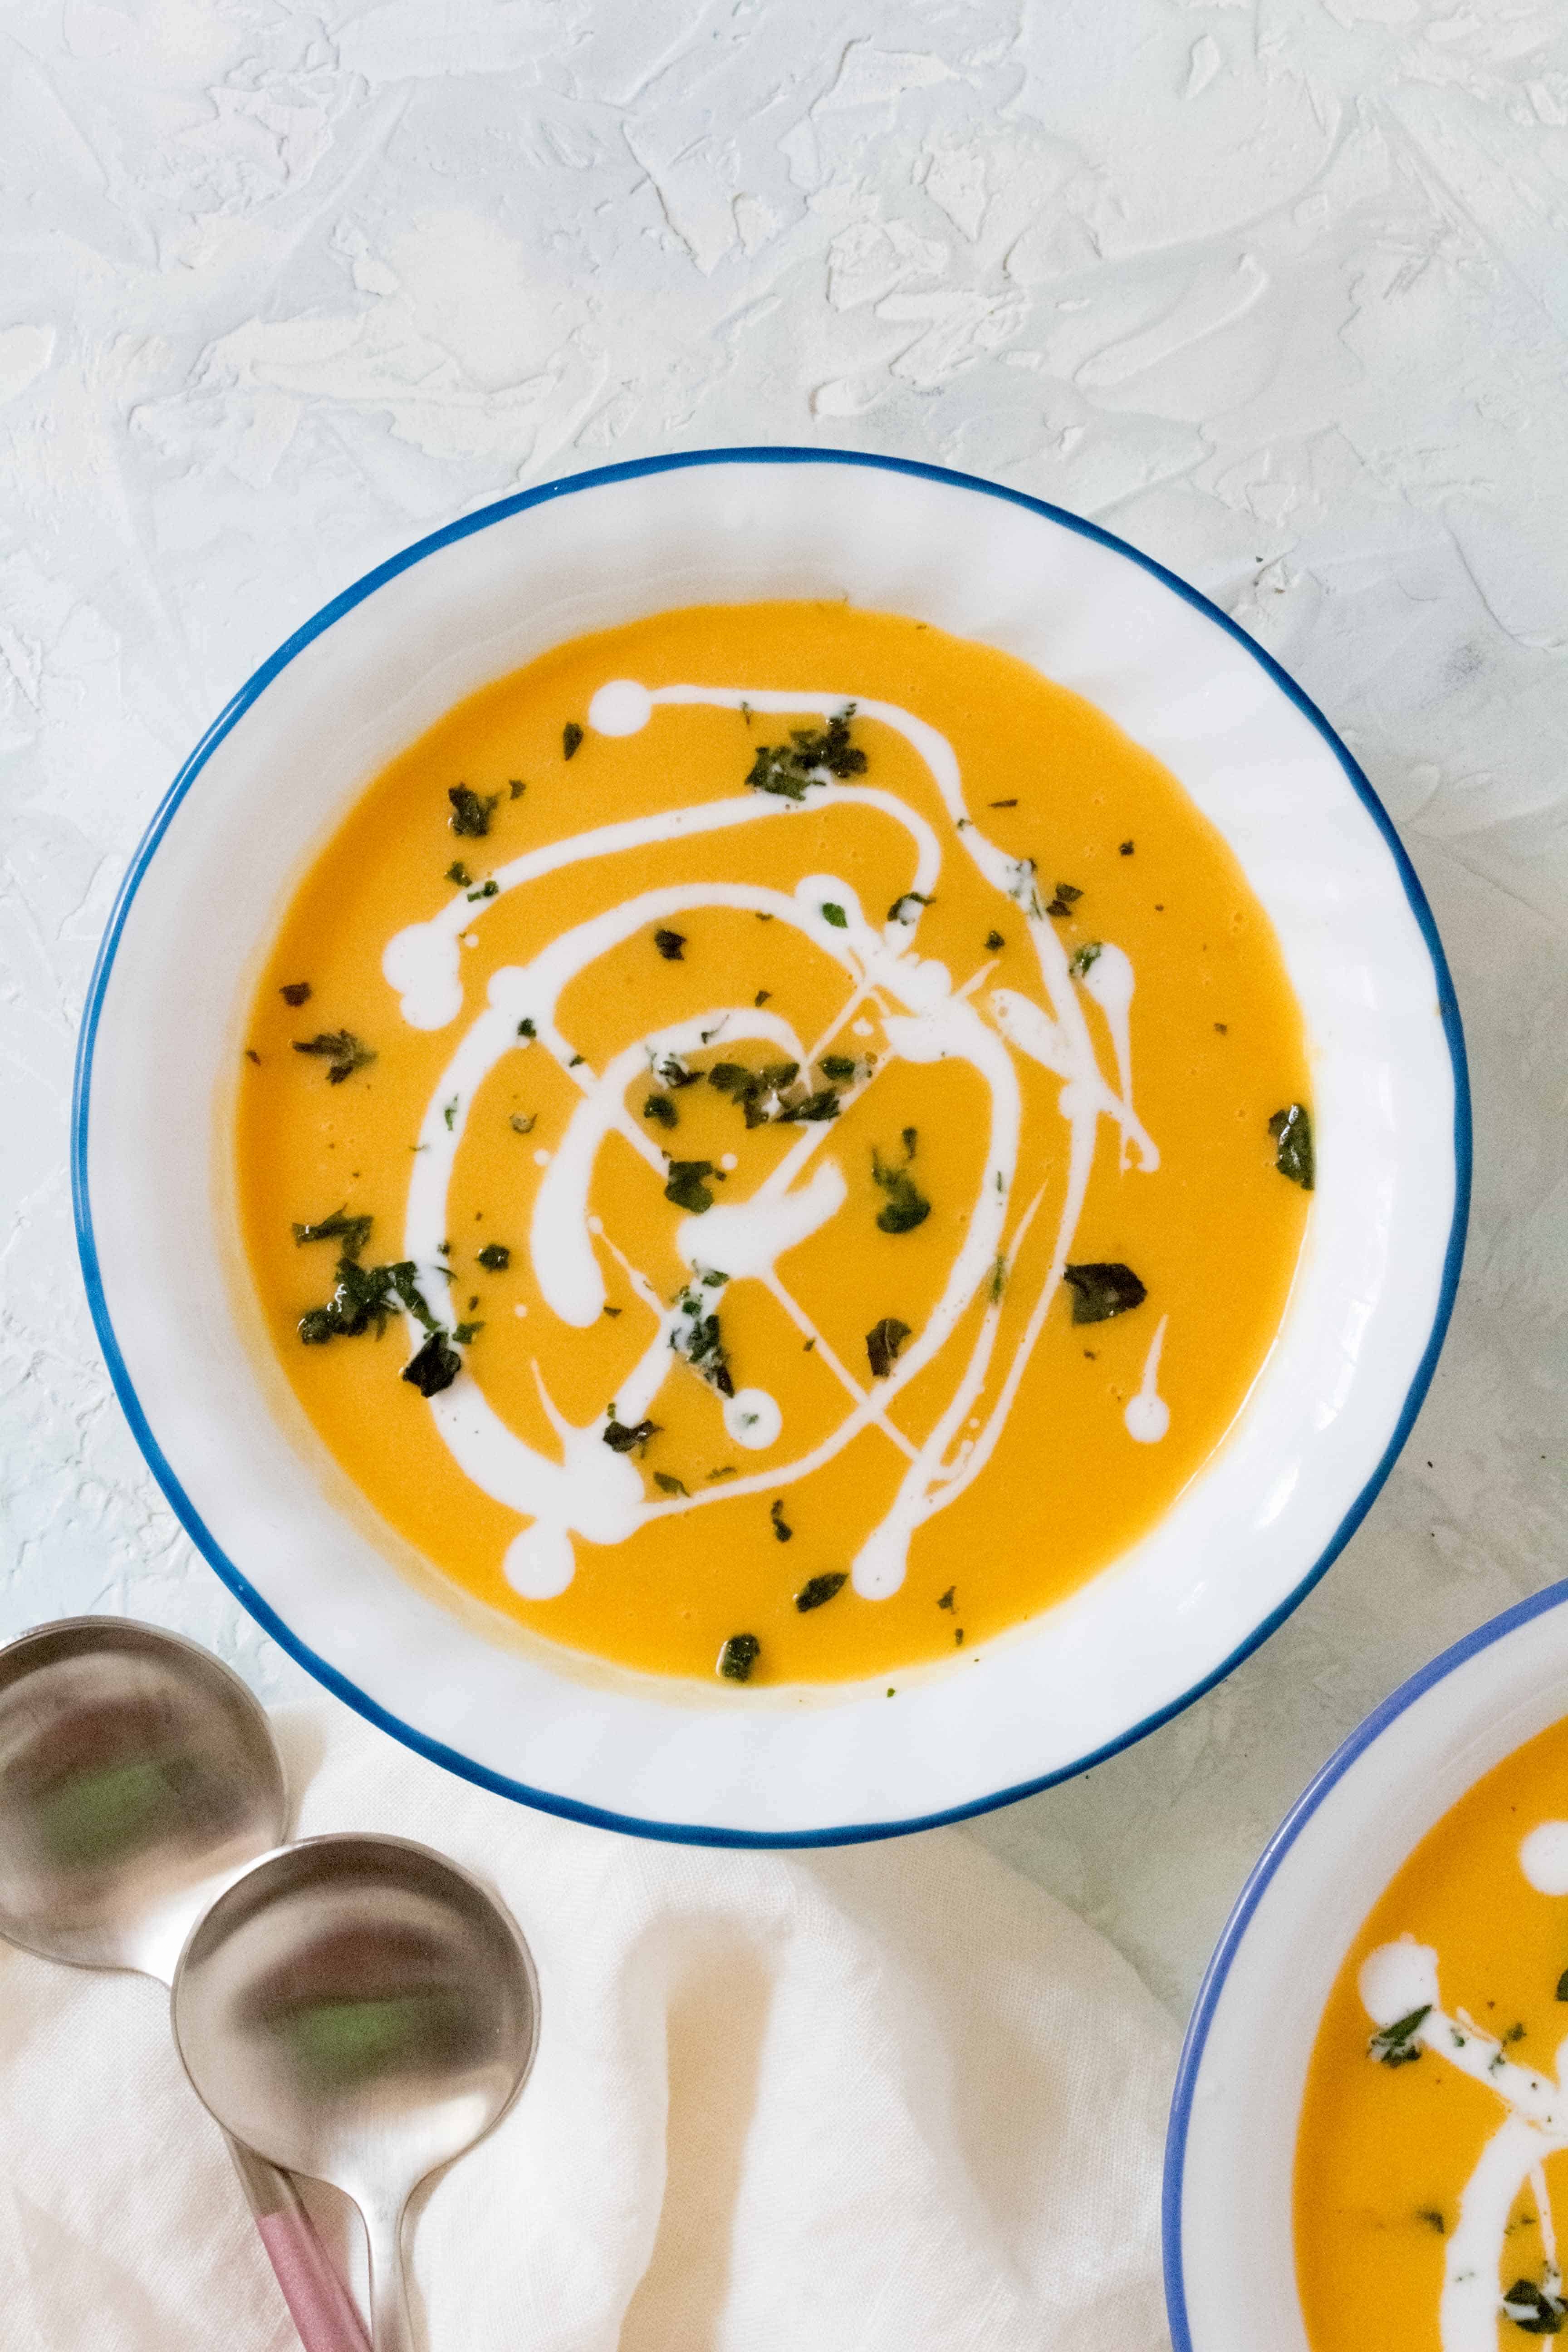 This Instant Pot Thai Carrot Sweet Potato Soup is the perfect mix of sweet with a hint of heat. Super quick and easy to make, you're going to want to make this regularly!